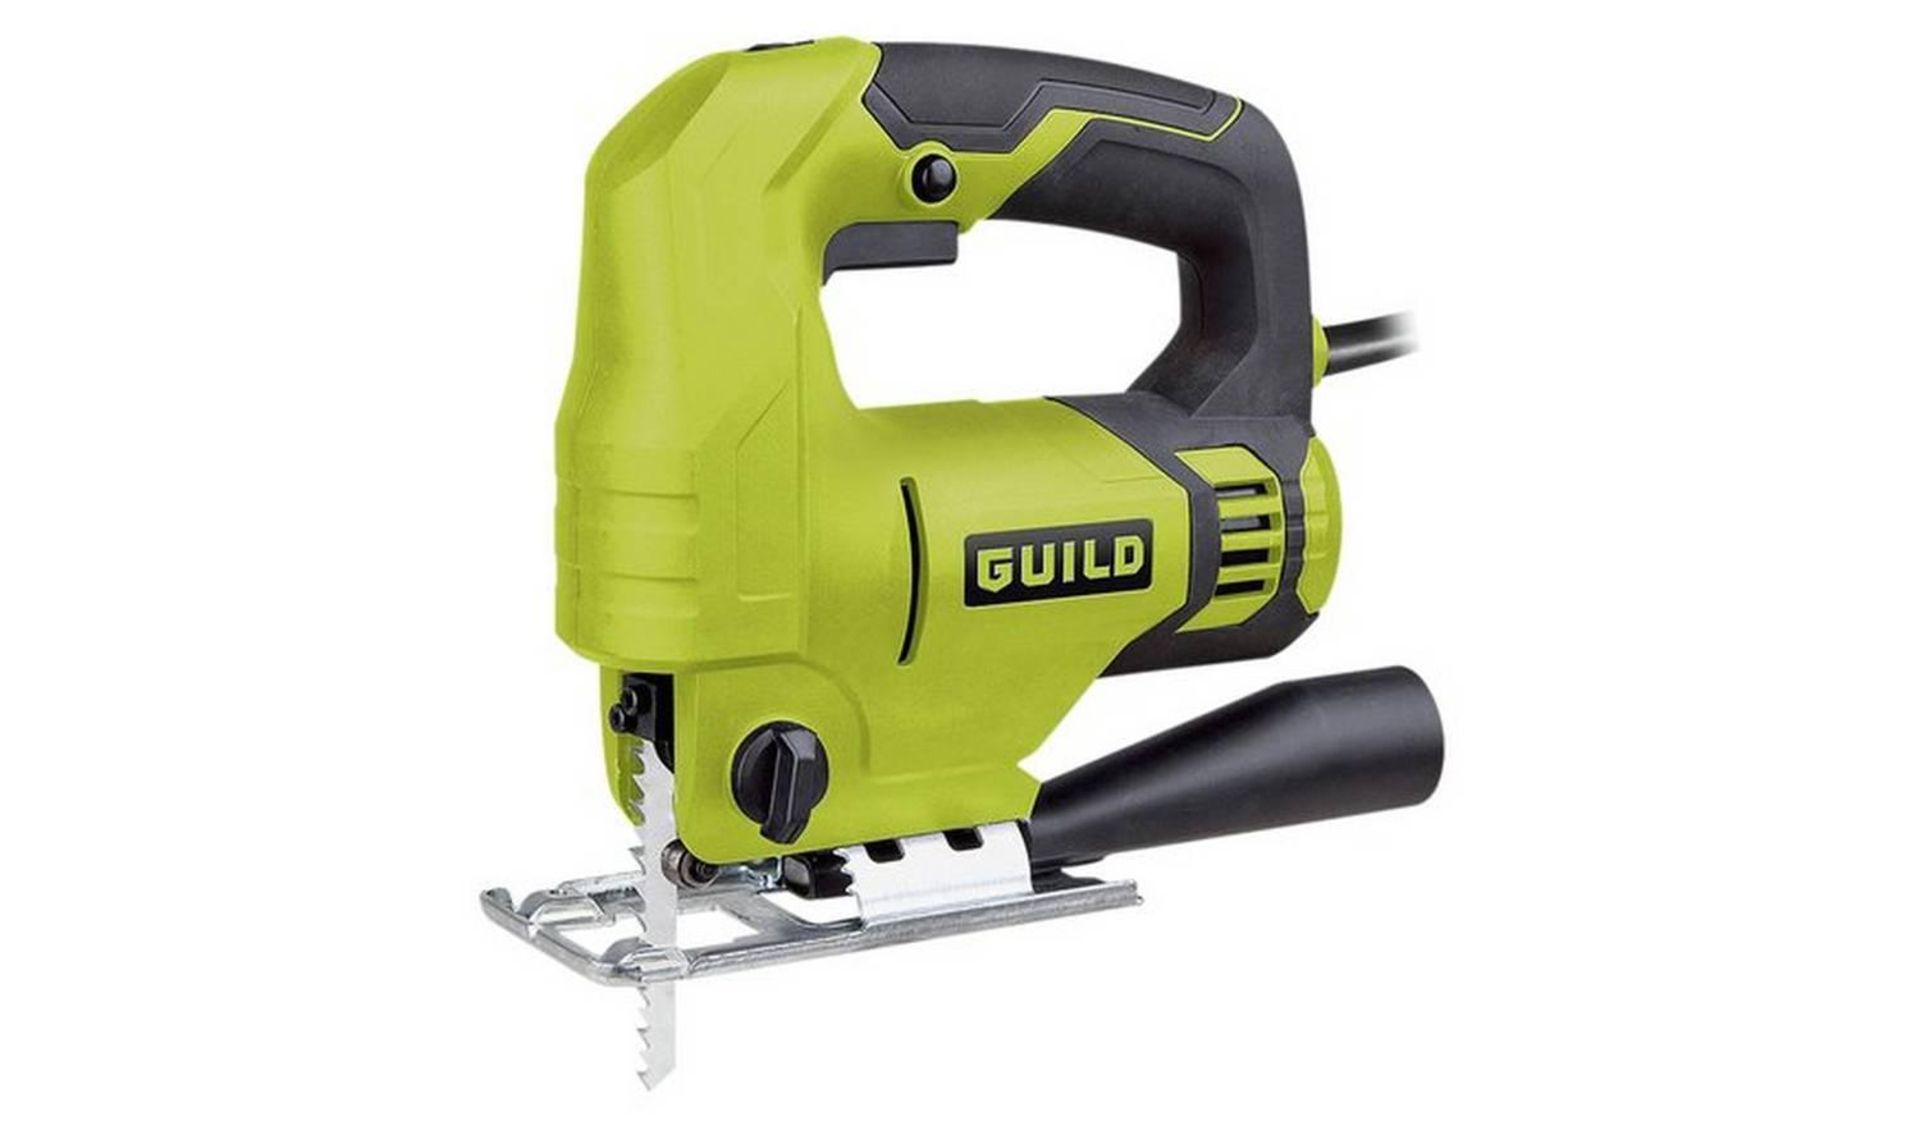 Guild Variable Speed Jigsaw - 710W, £30.00 RRP